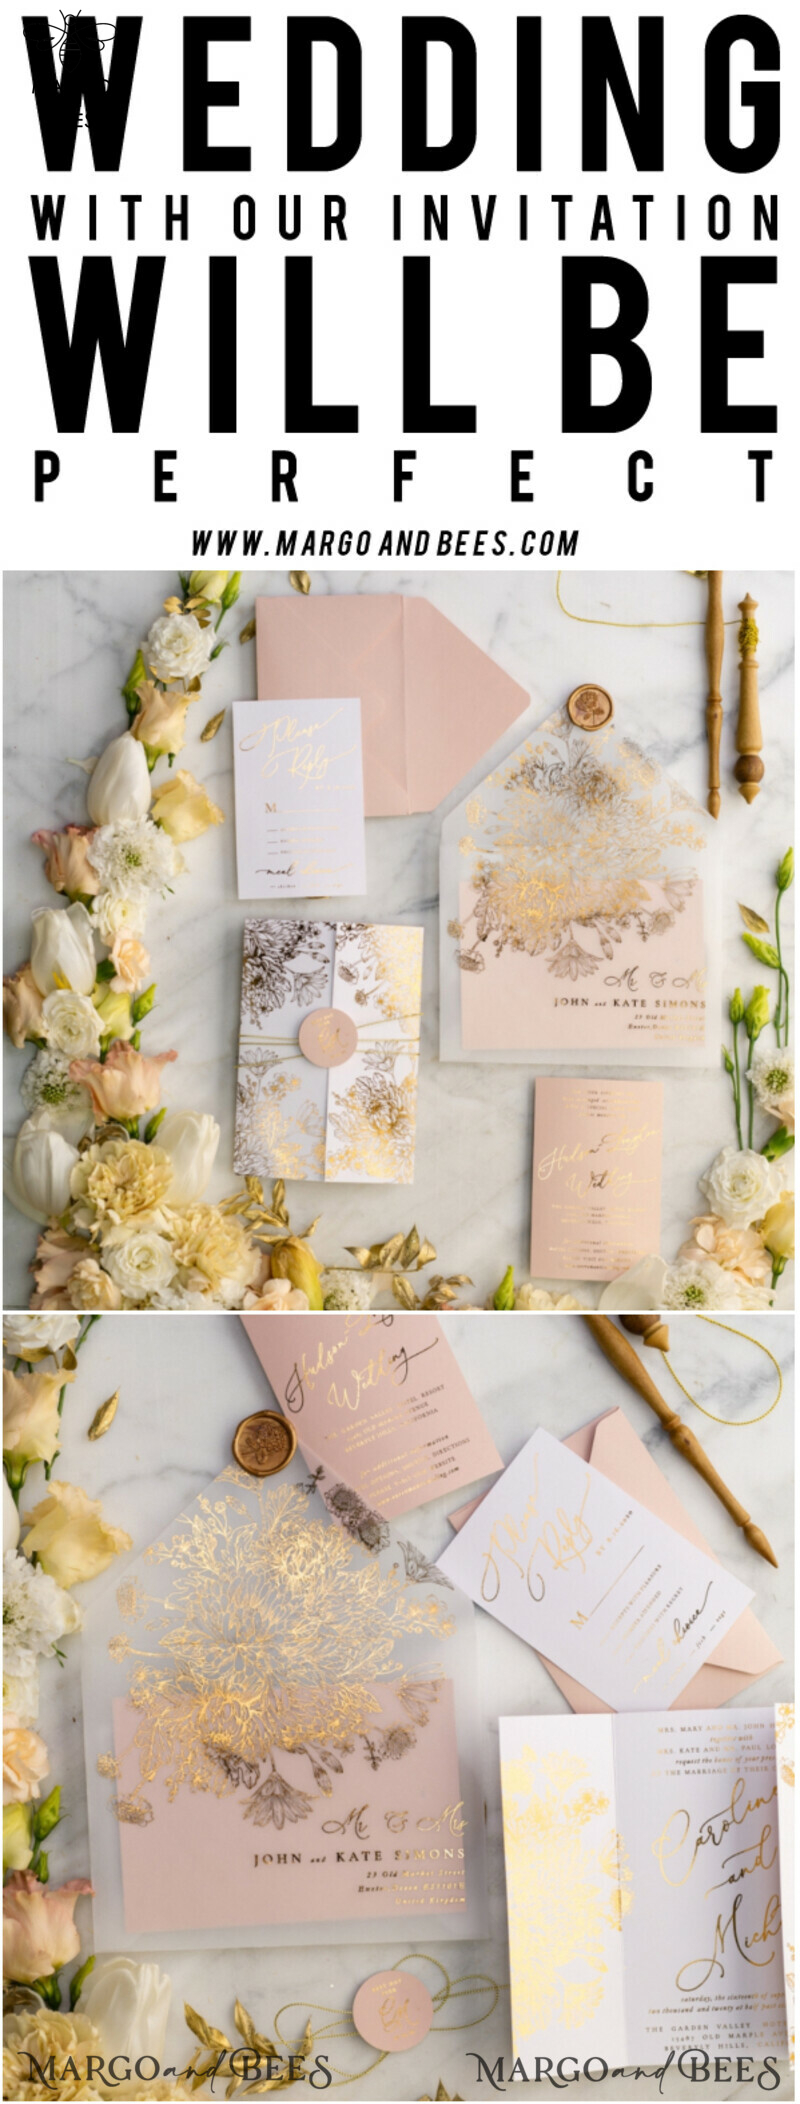 Elegant Arabic Golden Wedding Invitations with Glamour Gold Foil and Romantic Blush Pink - Exquisite Bespoke Indian Wedding Stationery-37